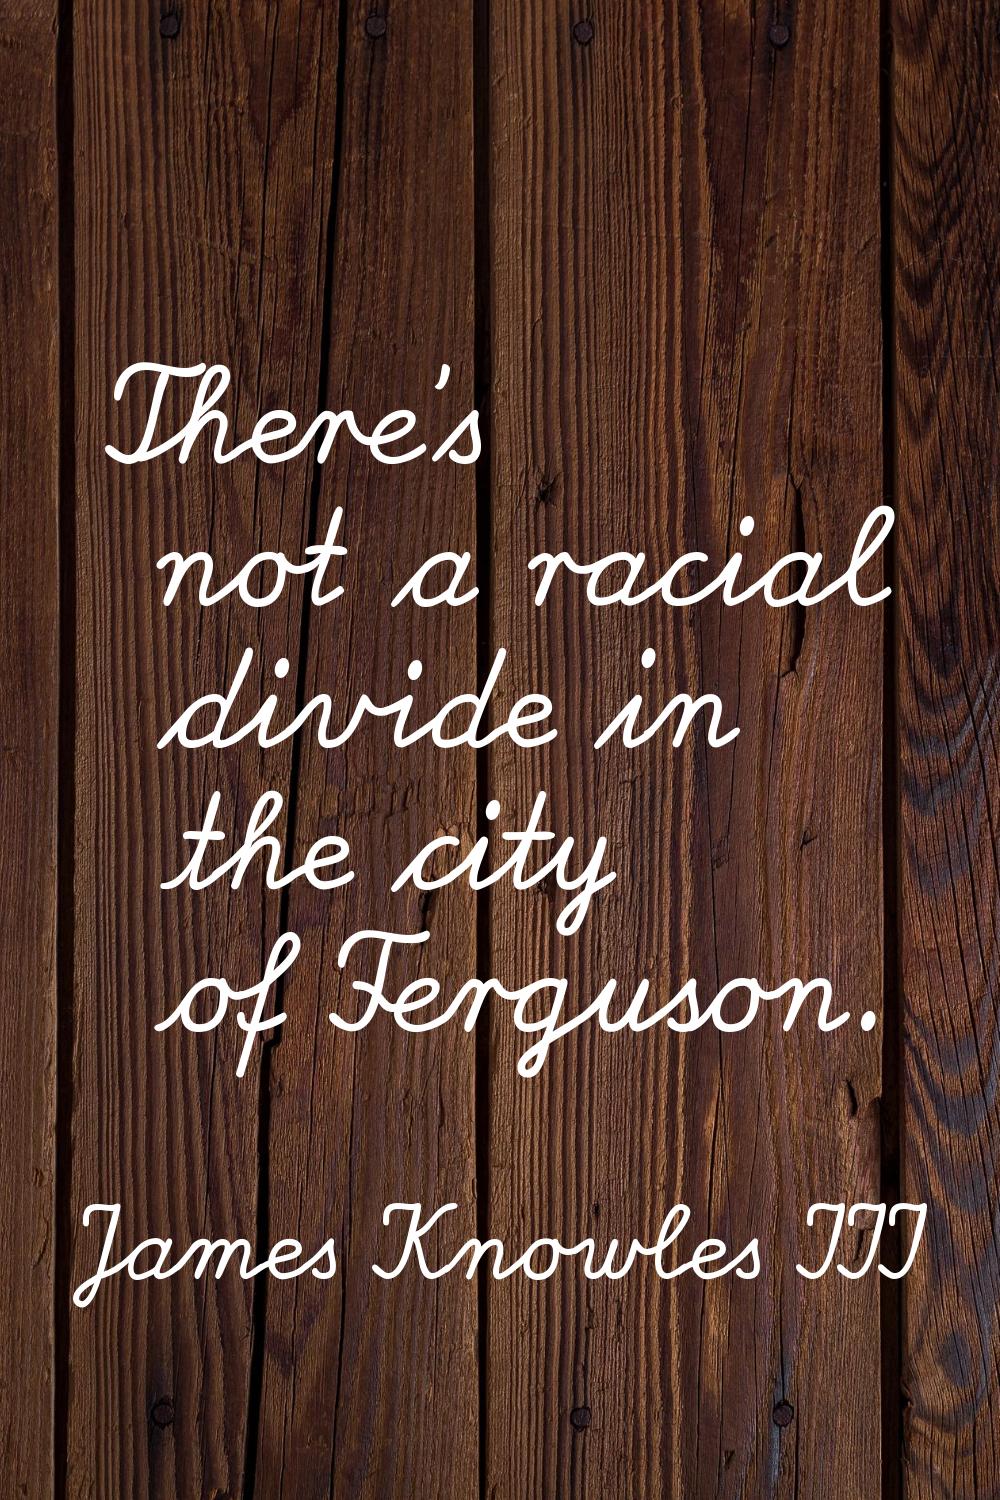 There's not a racial divide in the city of Ferguson.